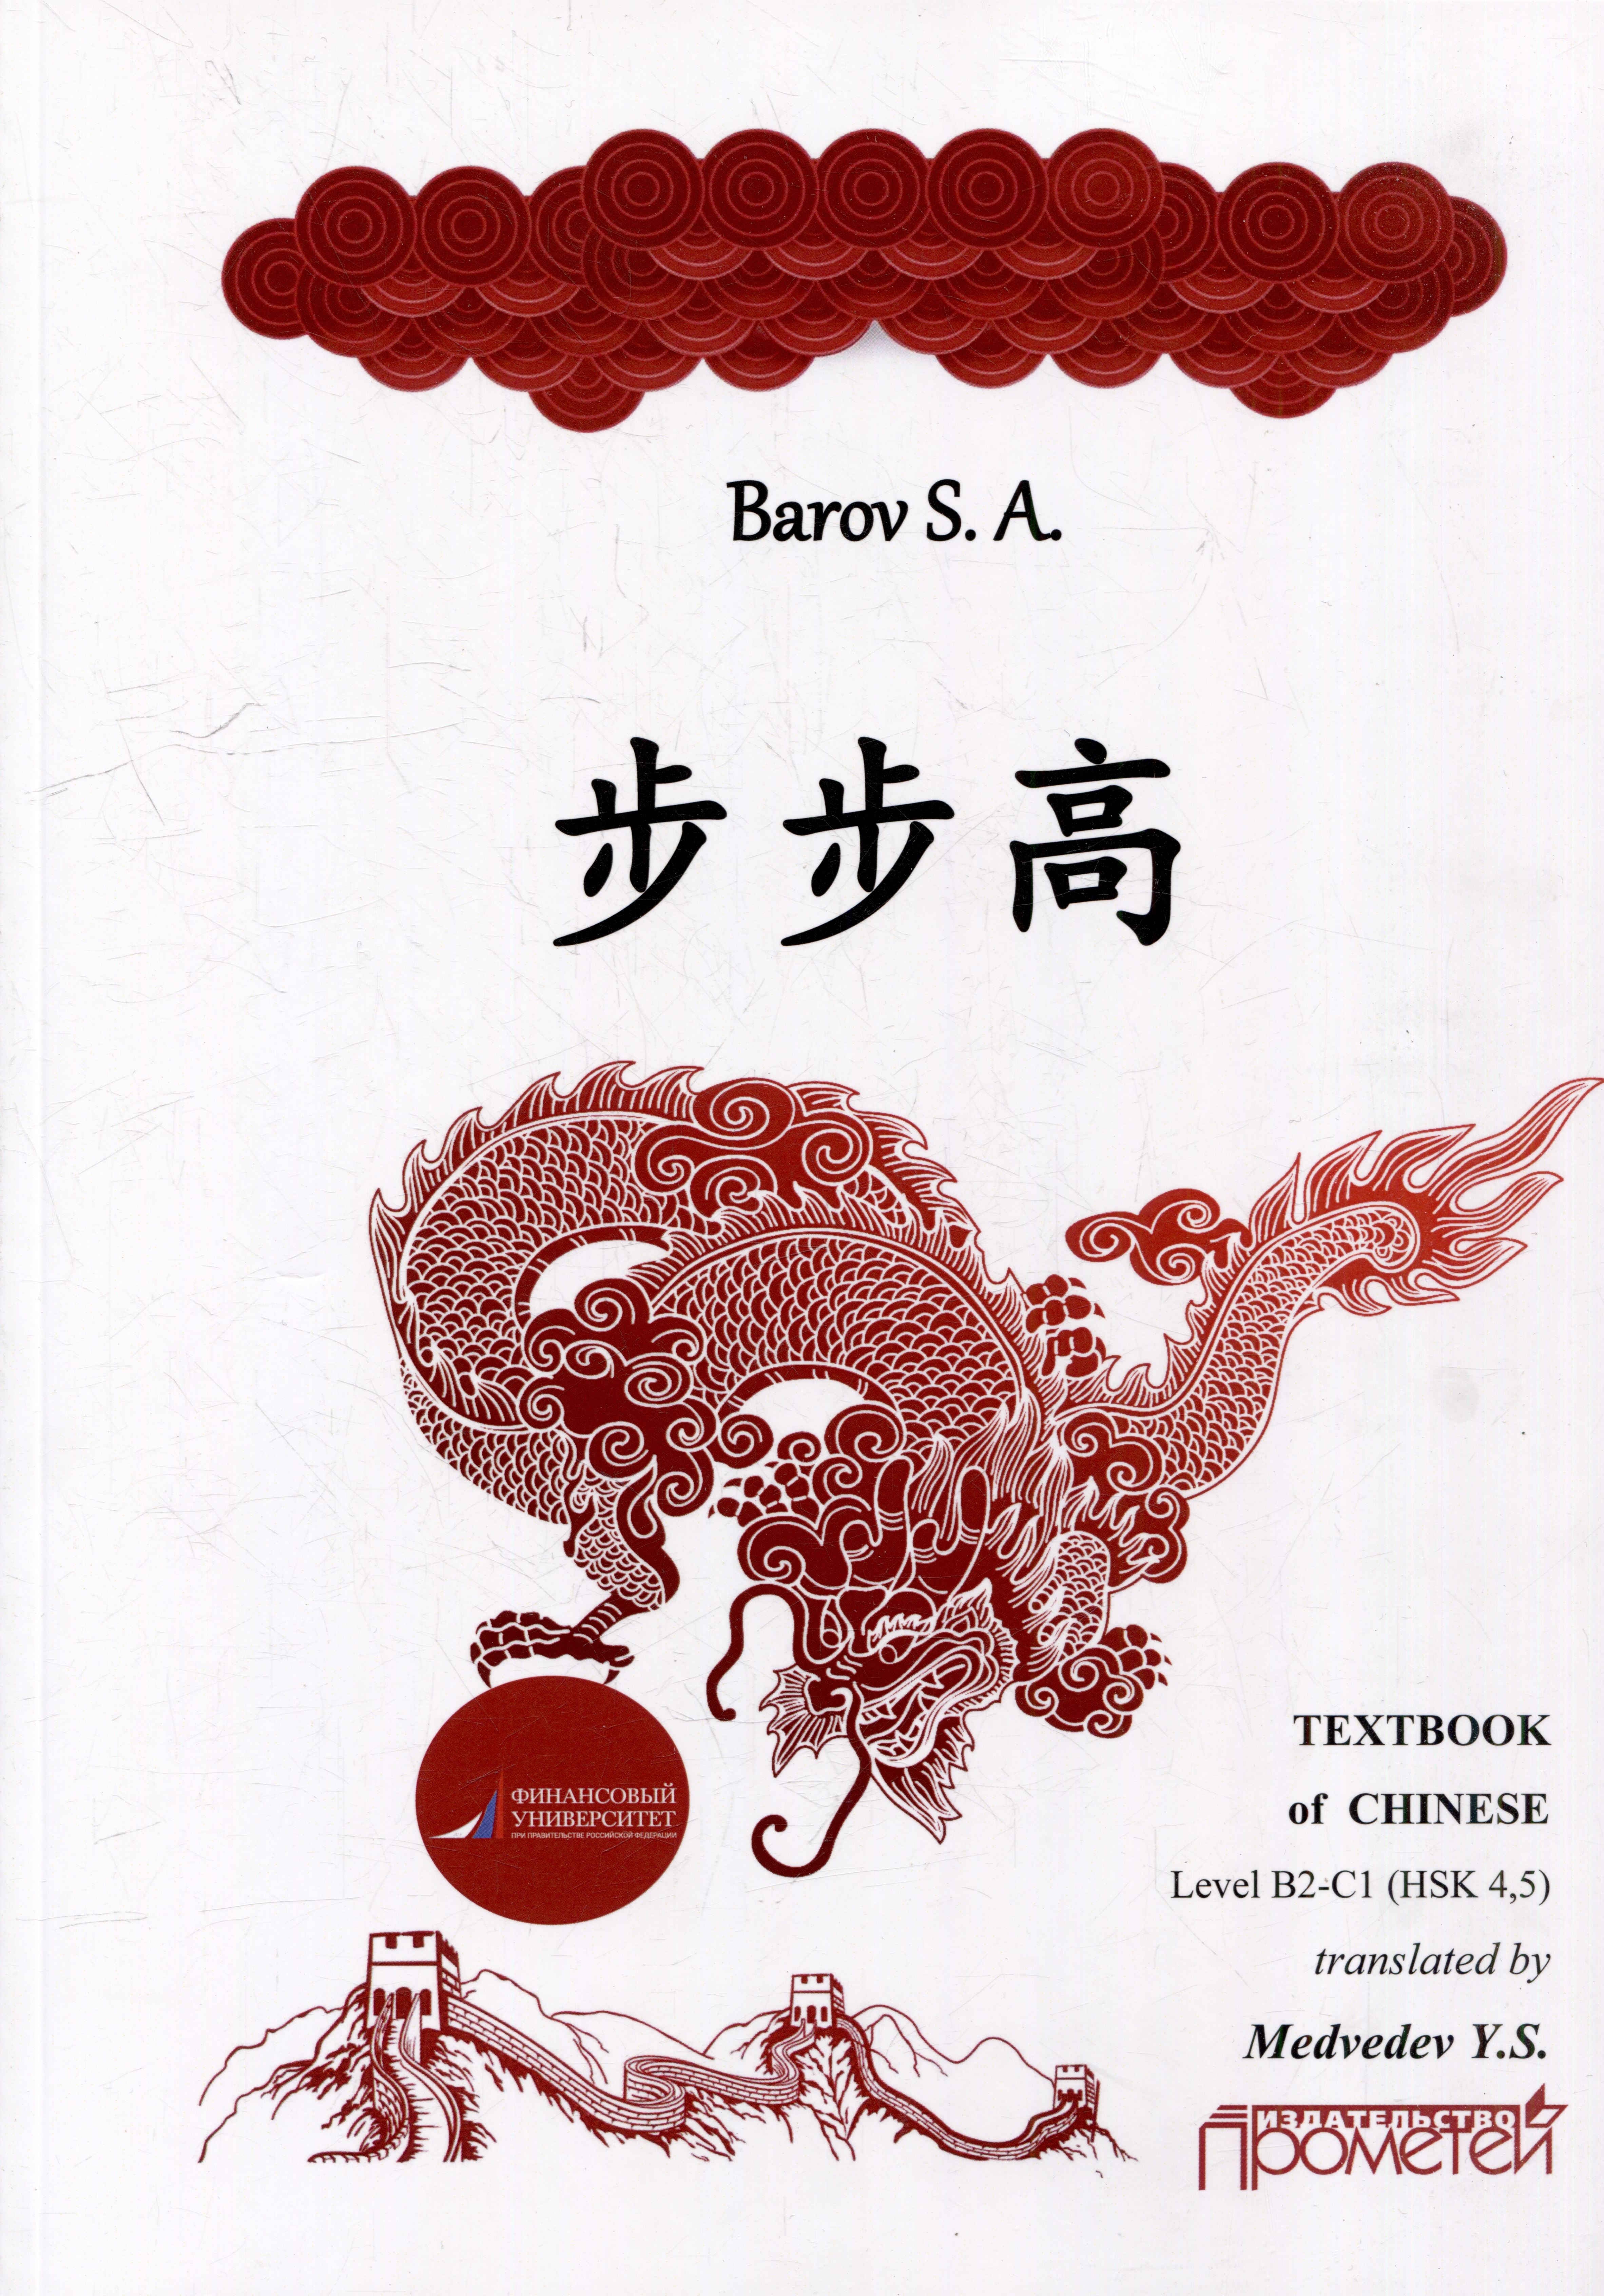 clark angus tai chi a practical approach to the ancient chinese movement for health and well being Баров Сергей Андреевич Textbook of Chinese («RISING STEP BY STEP») Level В2-С1 (HSK 4, 5)